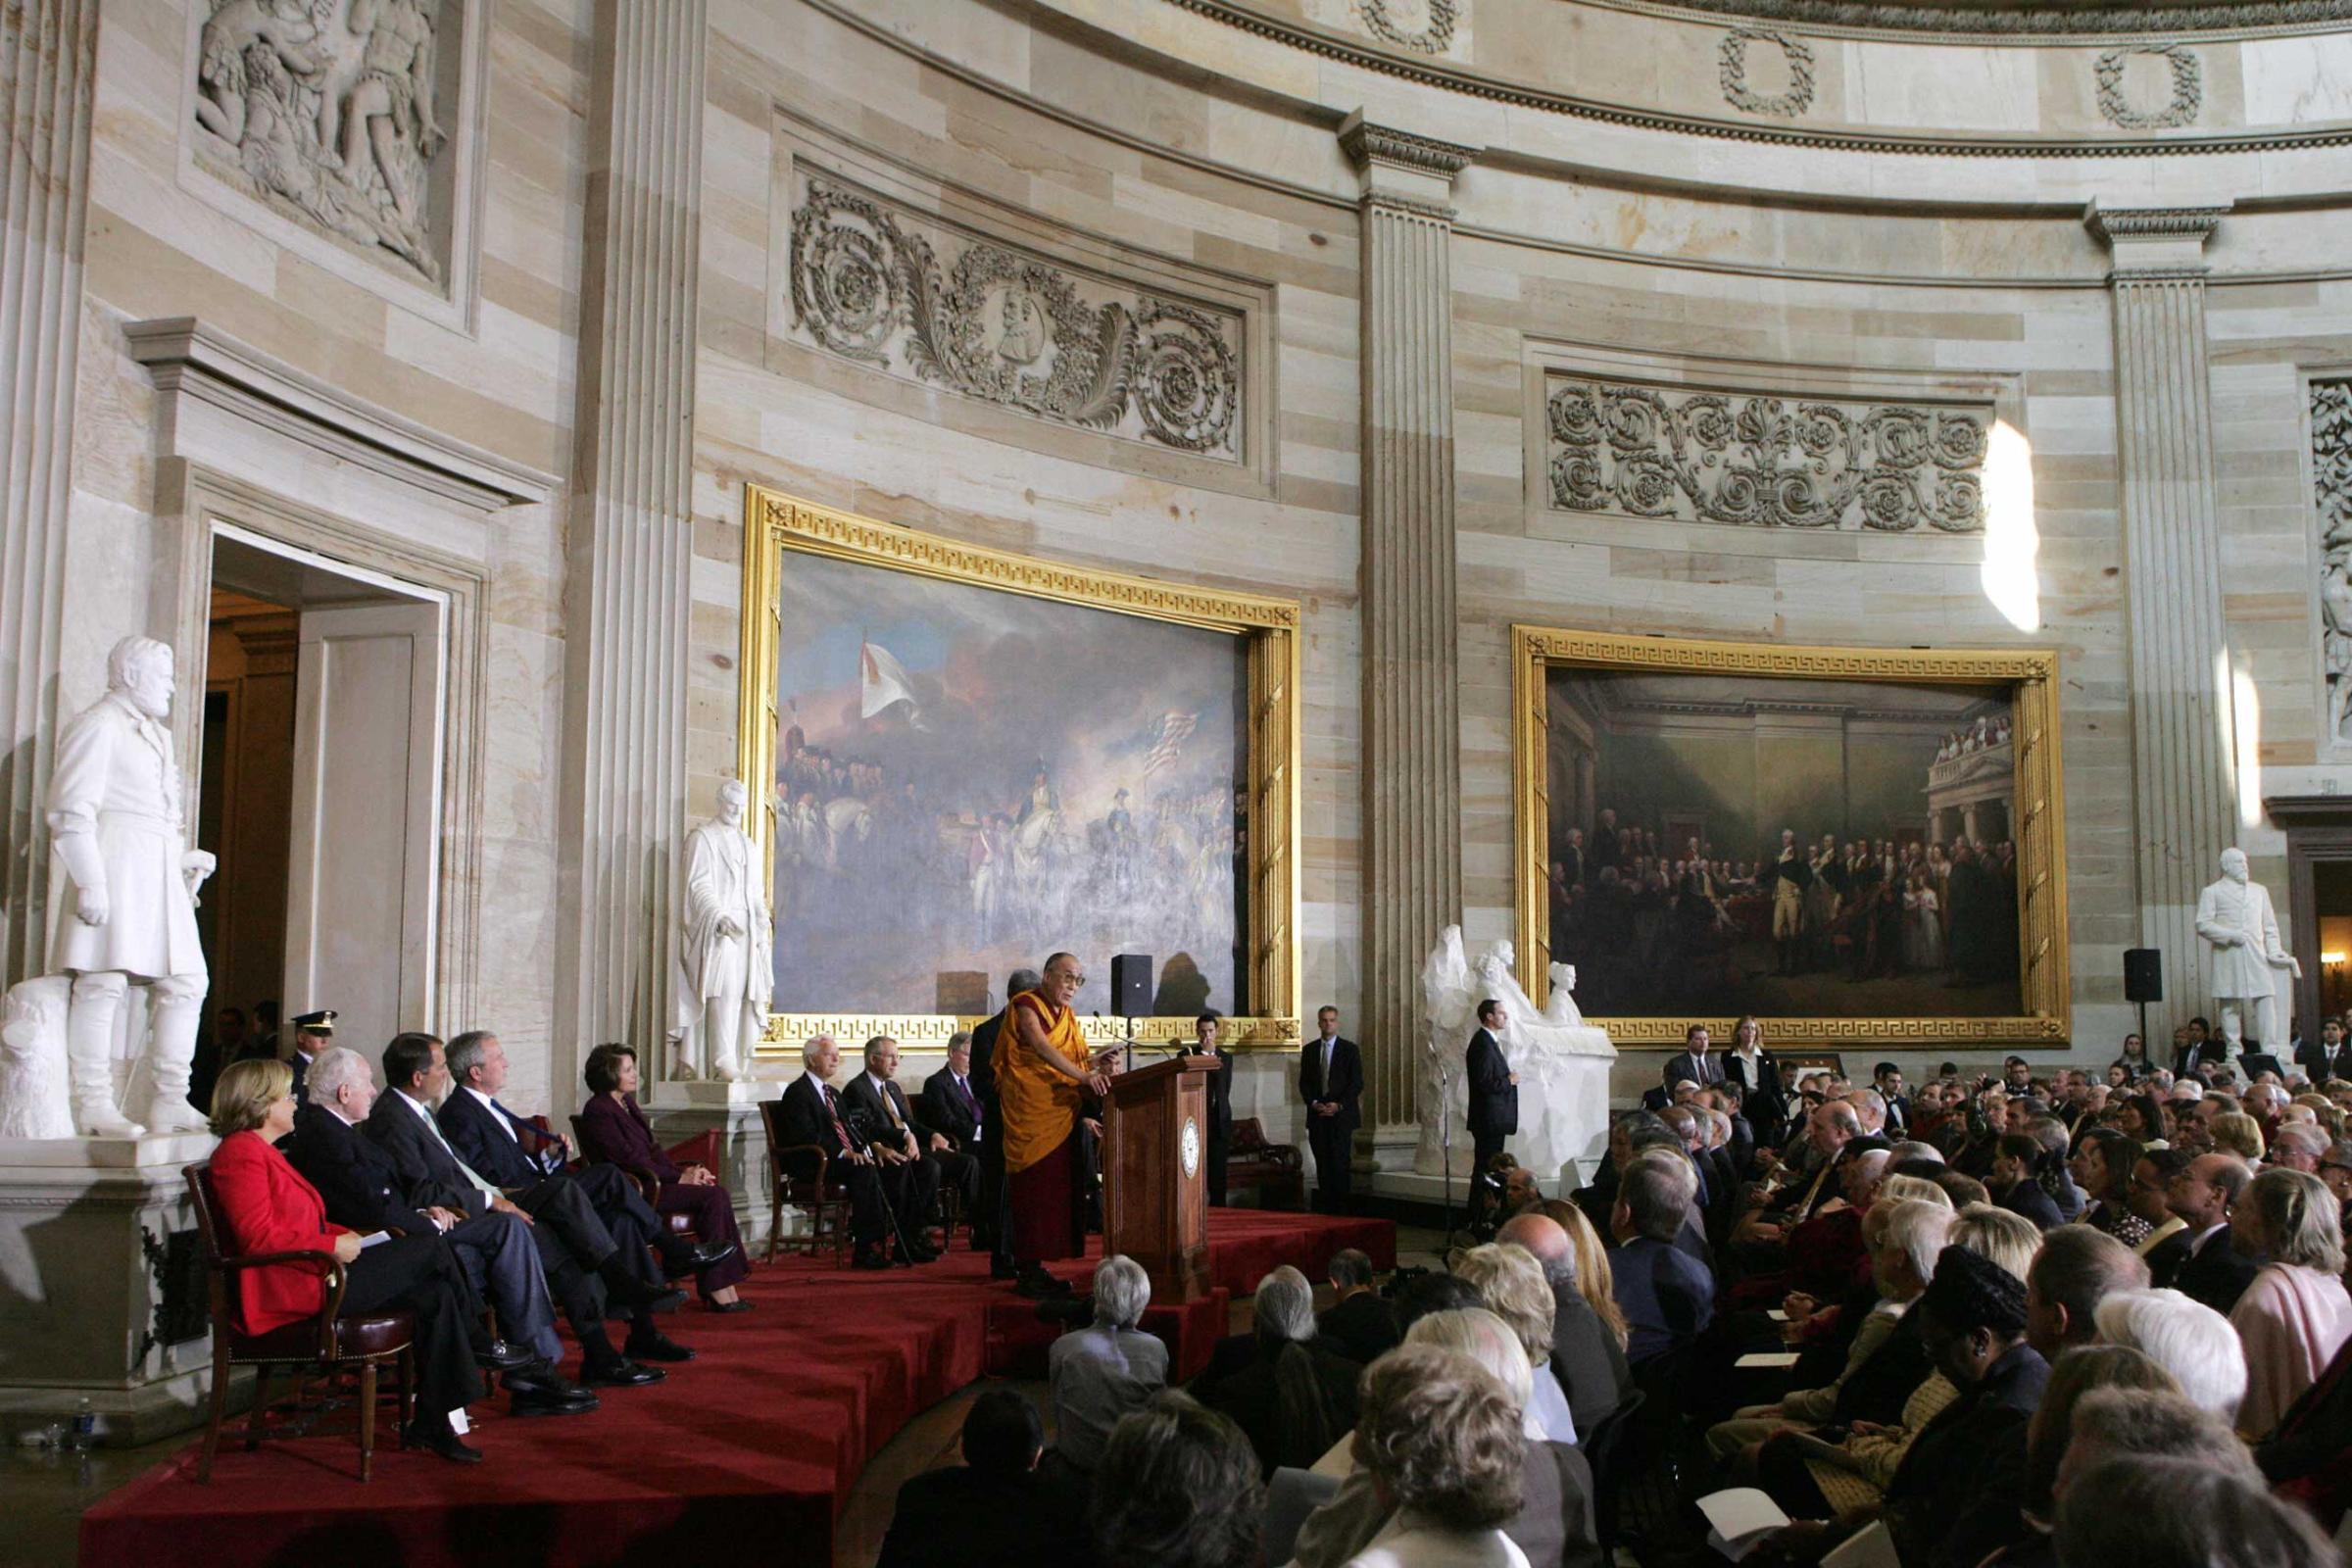 The Dalai Lama speaks during a ceremony presenting him with the Congressional Gold Medal in the Rotunda of the US Capitol in Washington, DC, Oct. 2007.